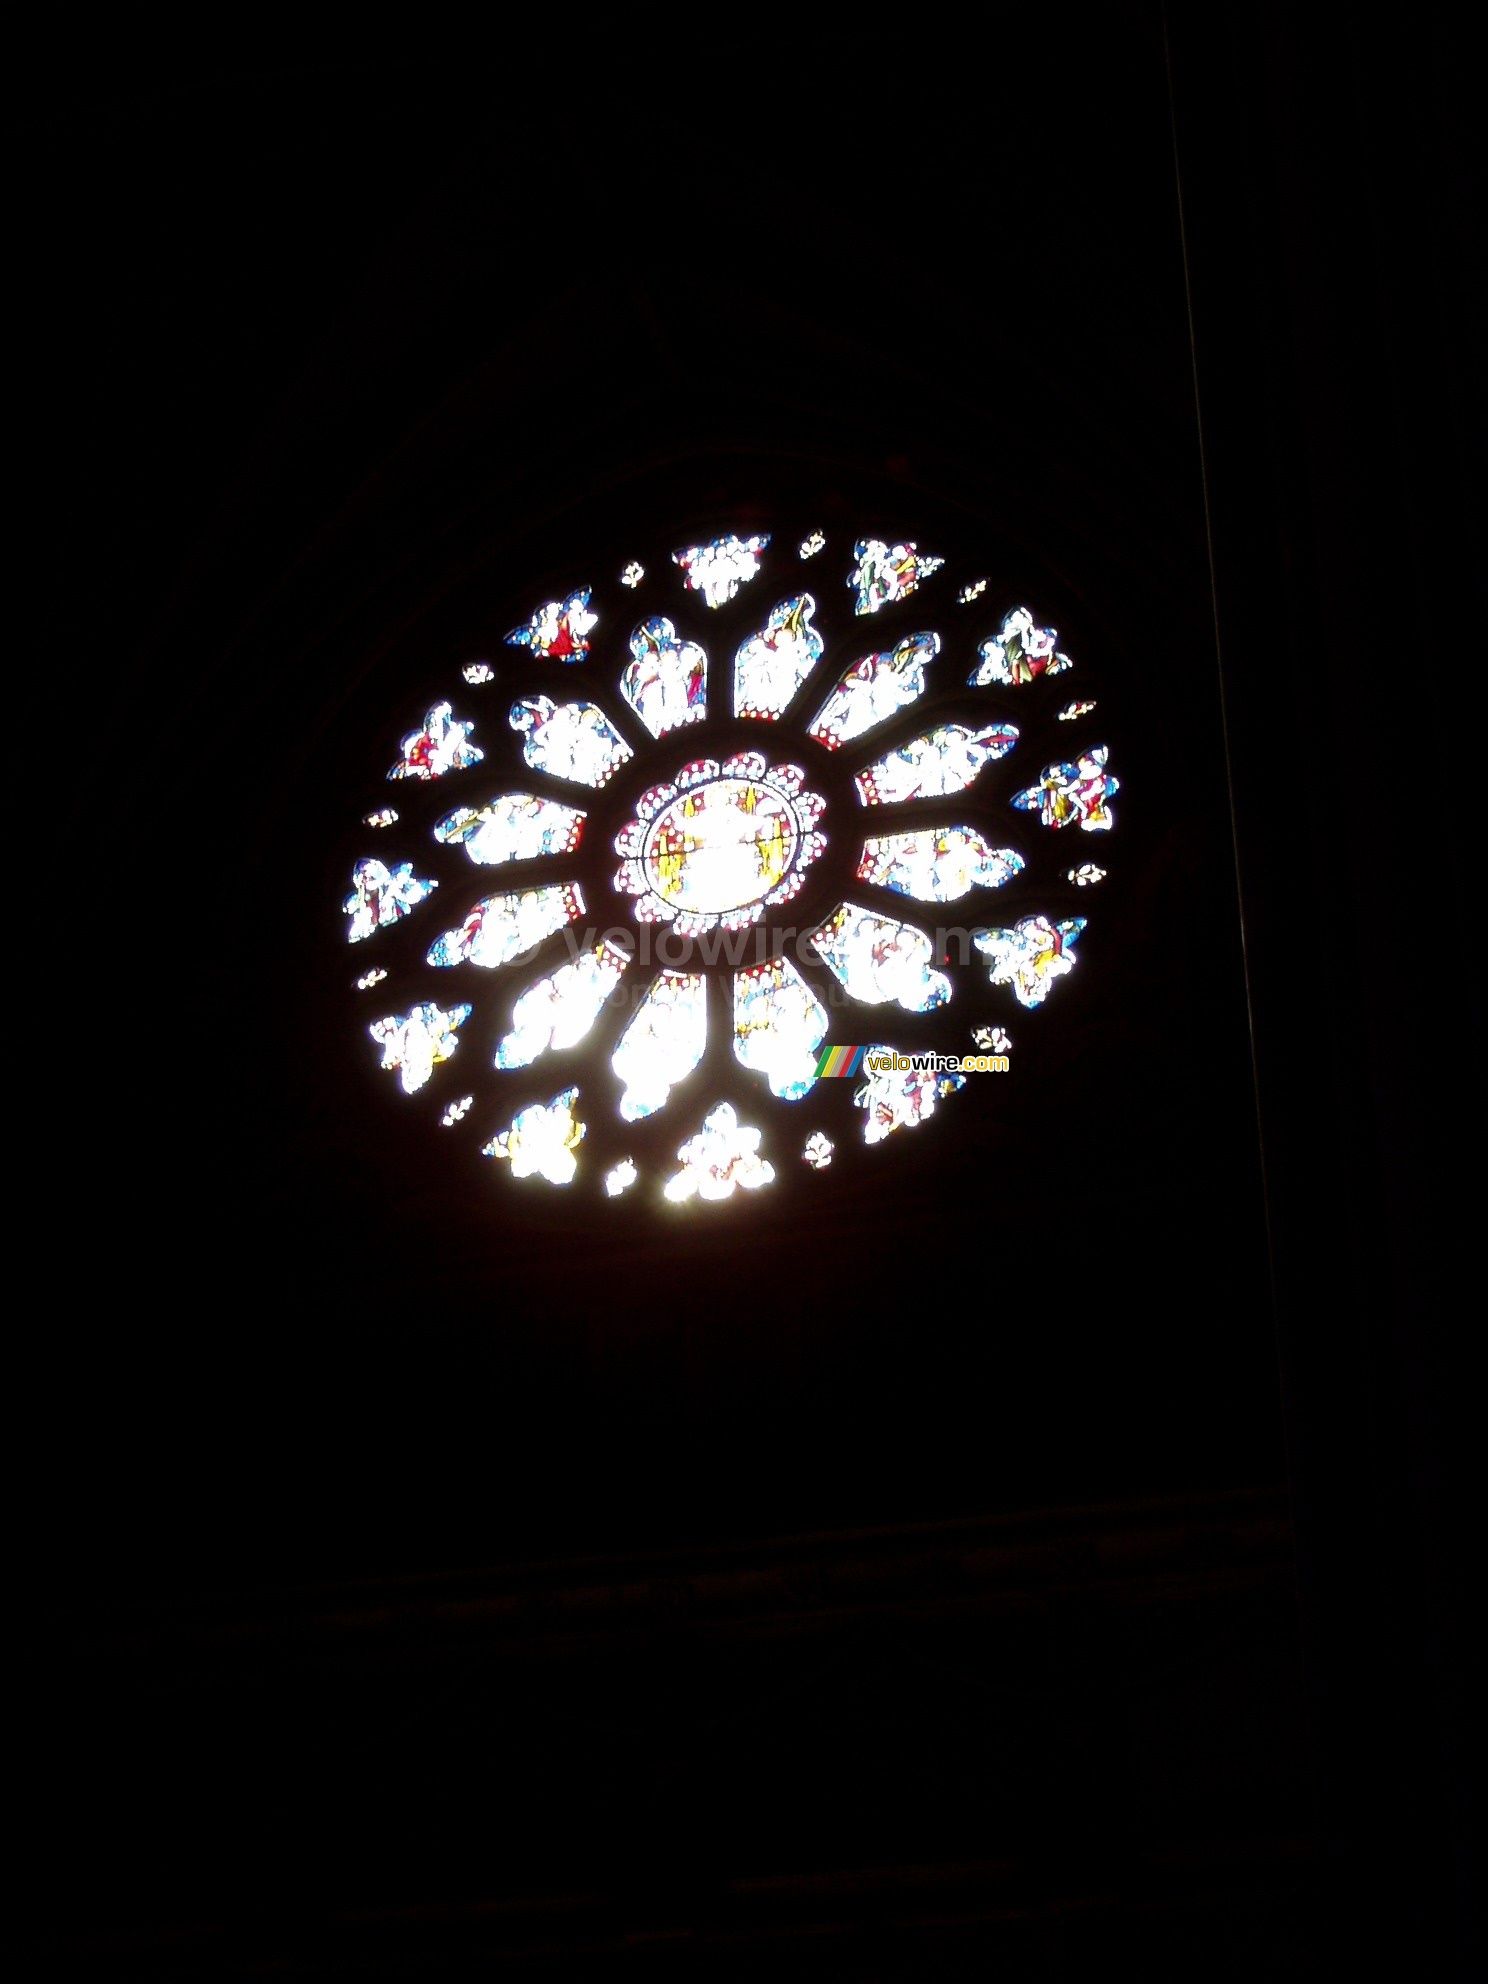 Stained-glass window in the cathedral of Bristol